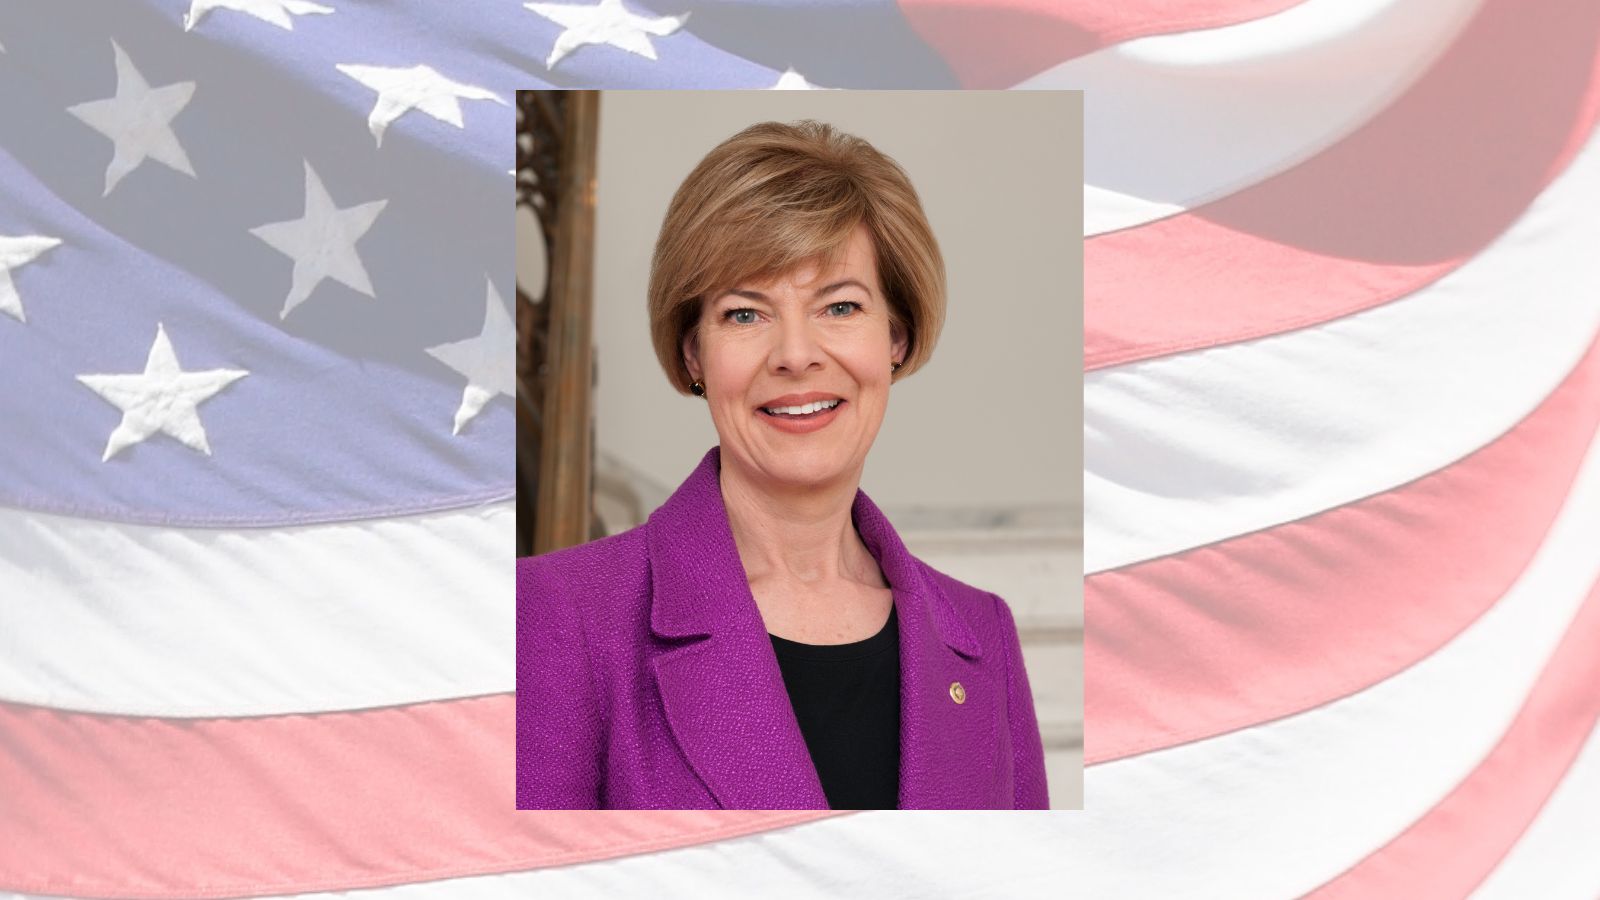 Senator Baldwin delivers $6 million in federal funding for Wisconsin’s agriculture businesses